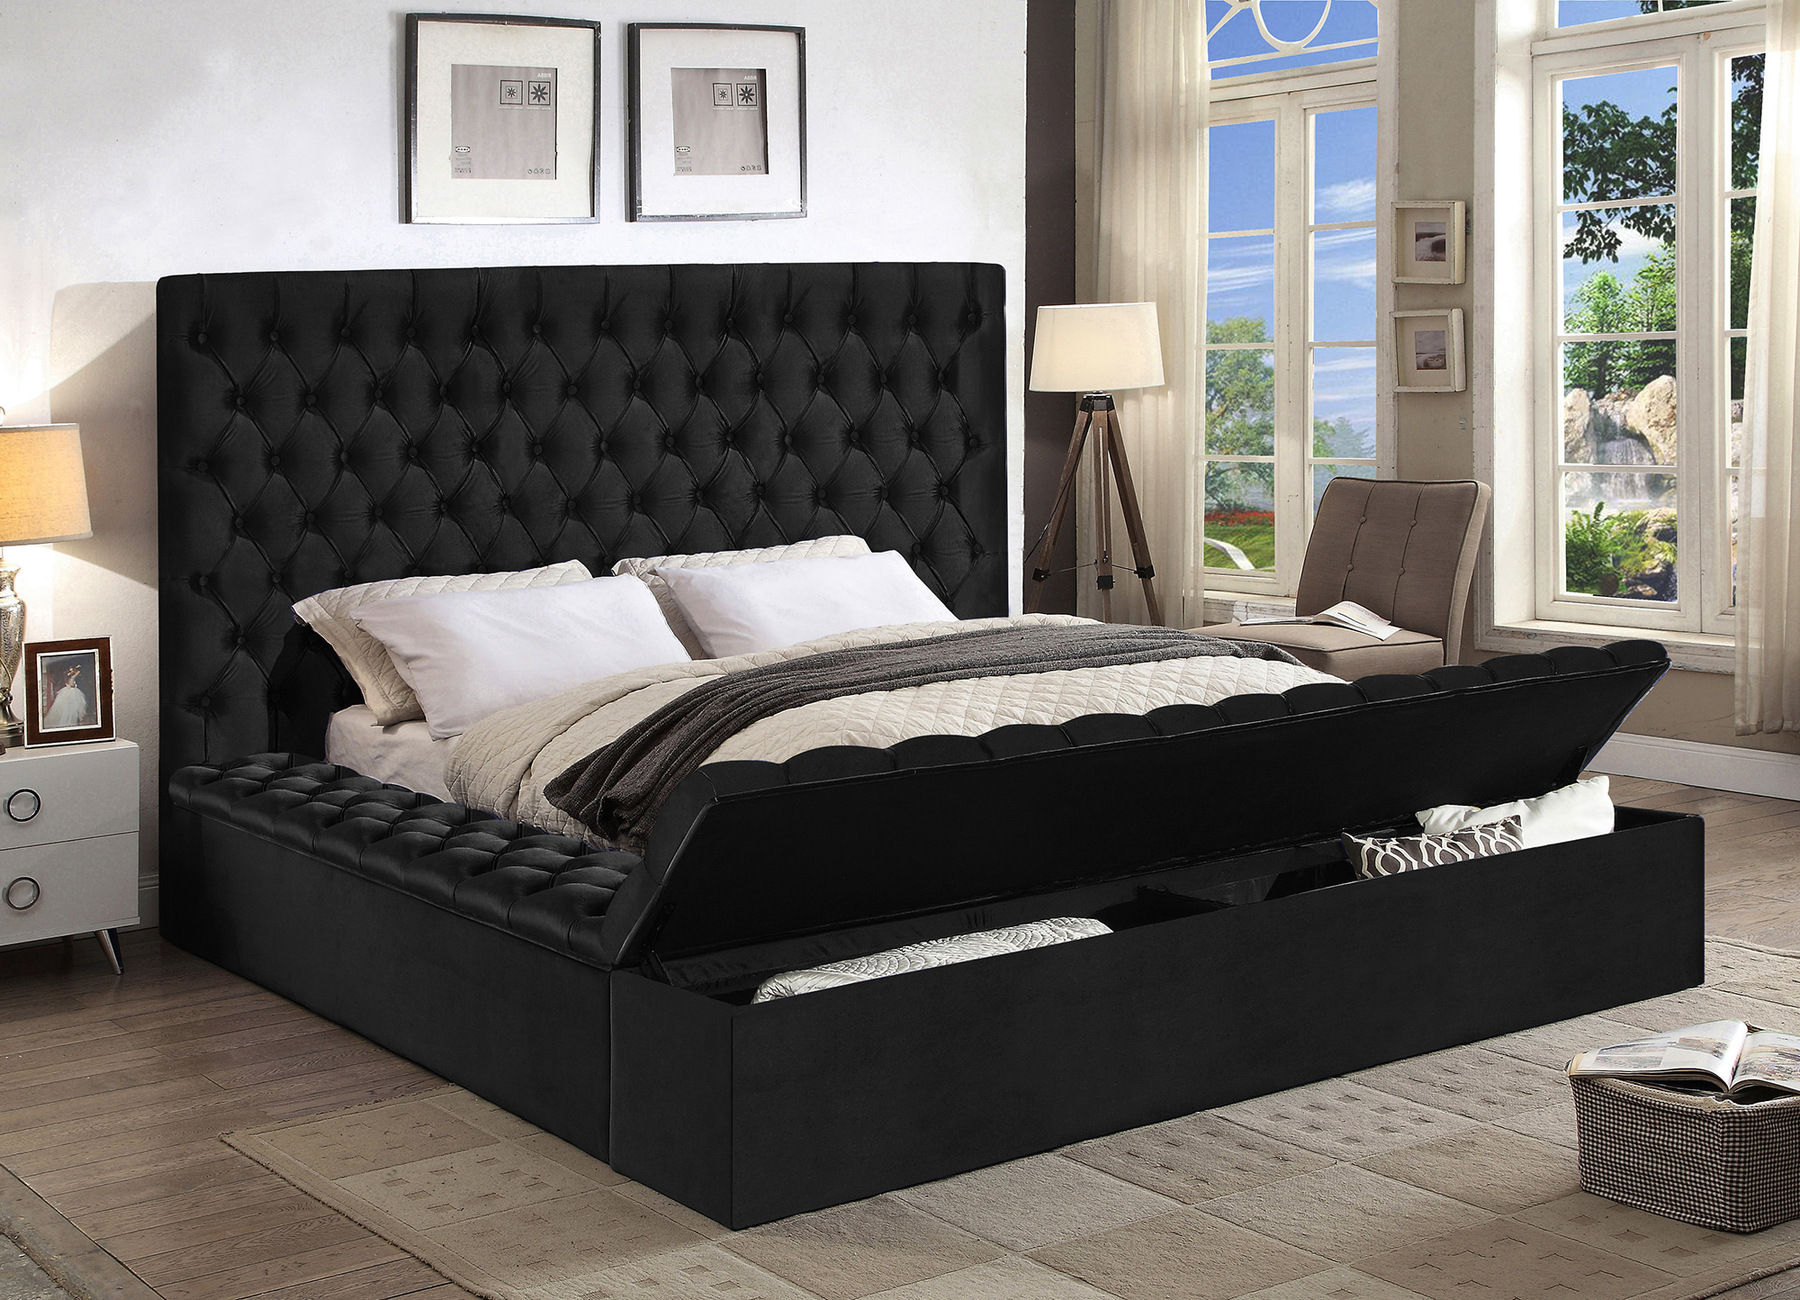 Bliss Black King Size Bed bliss Meridian Furniture King Size Beds